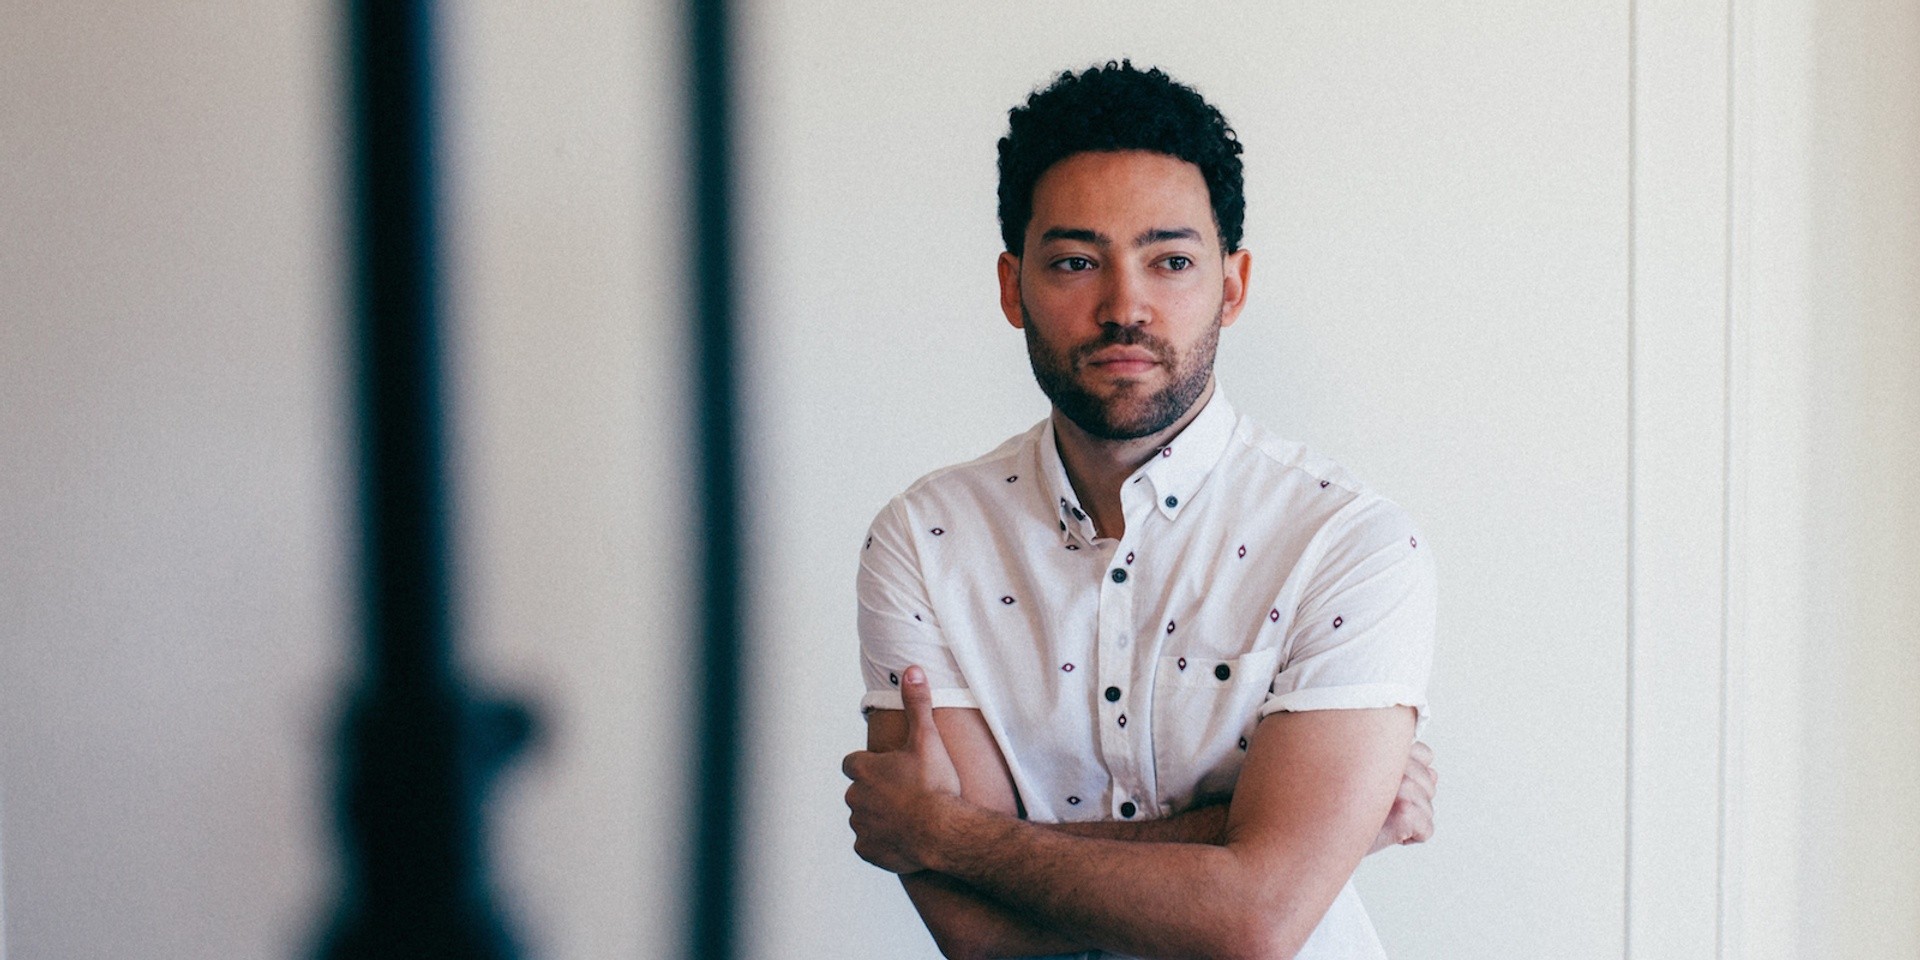 WATCH: Taylor McFerrin talks about his anticipated new album, his recording process and more